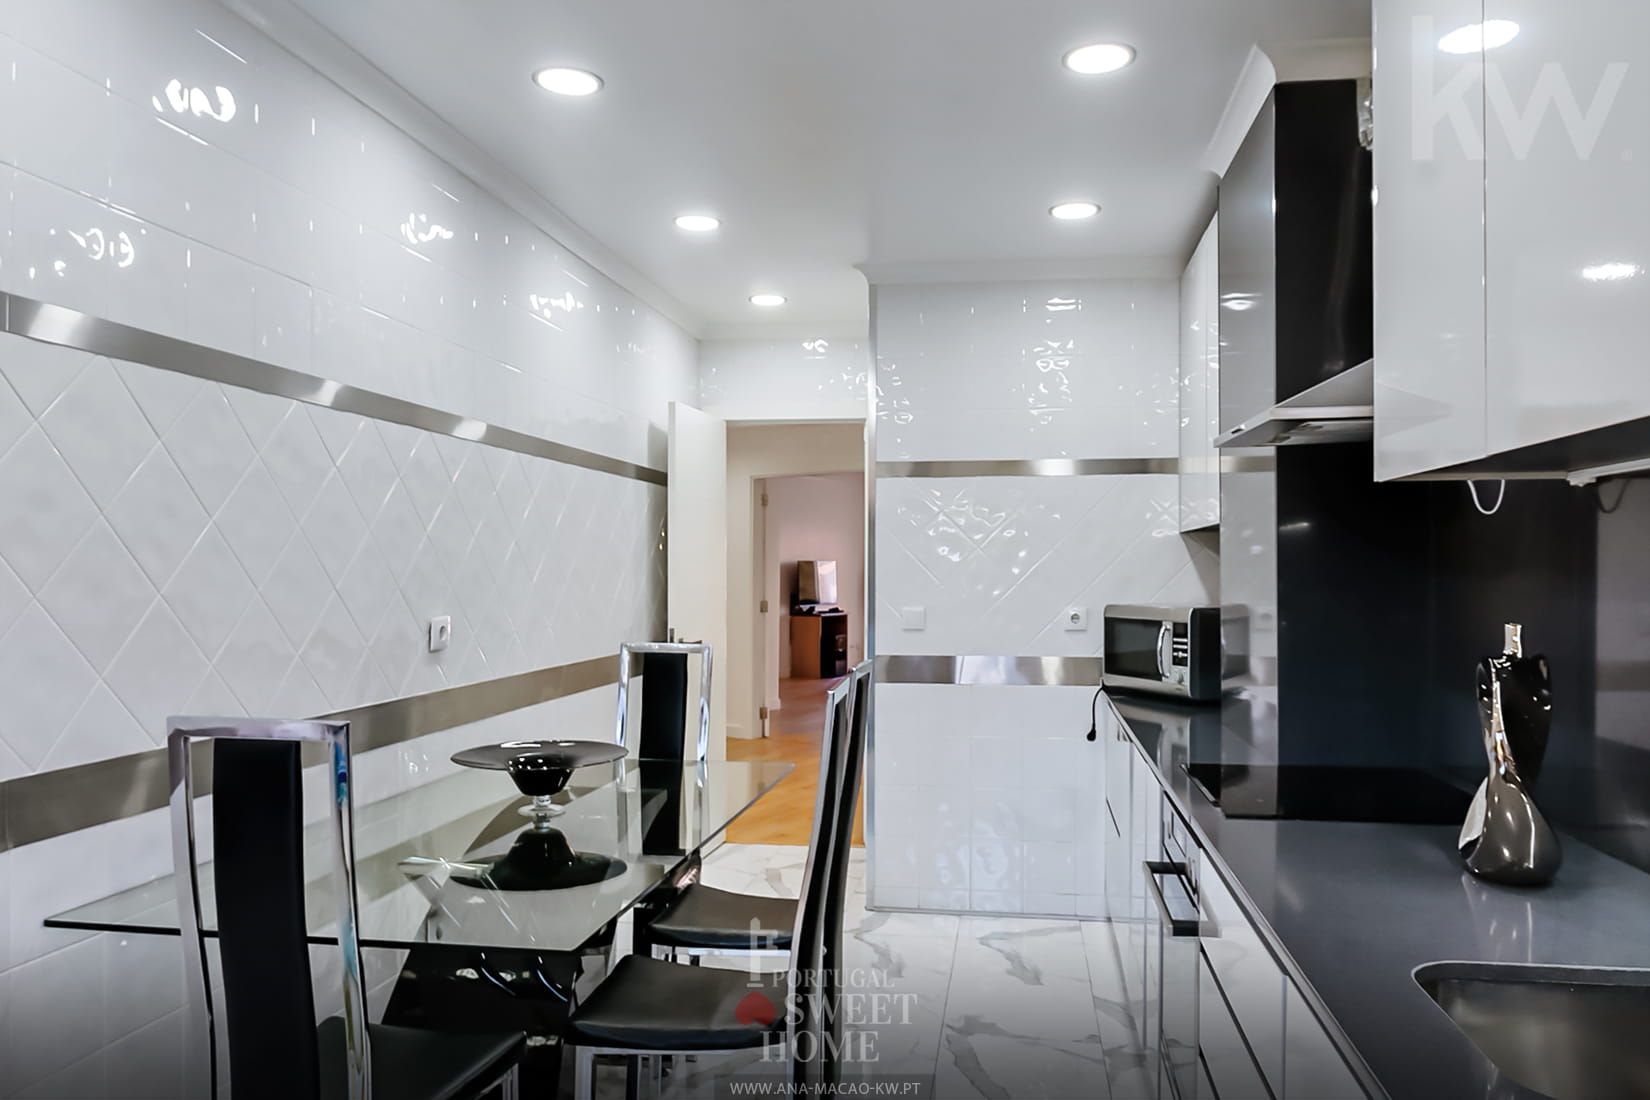 Fully equipped kitchen (15.6 m2)